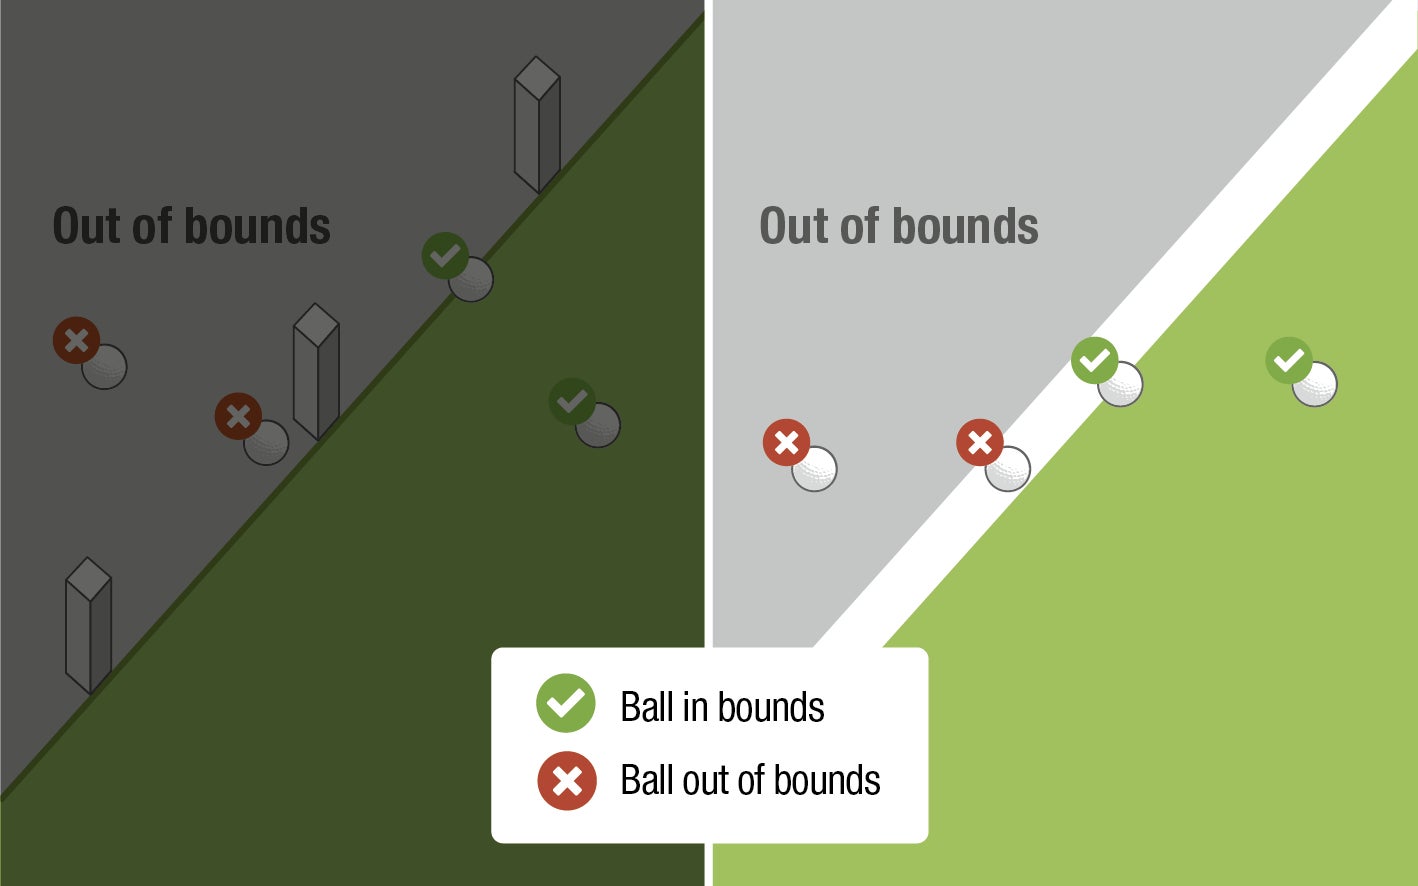 DIAGRAM 18.2a: WHEN BALL IS OUT OF BOUNDS